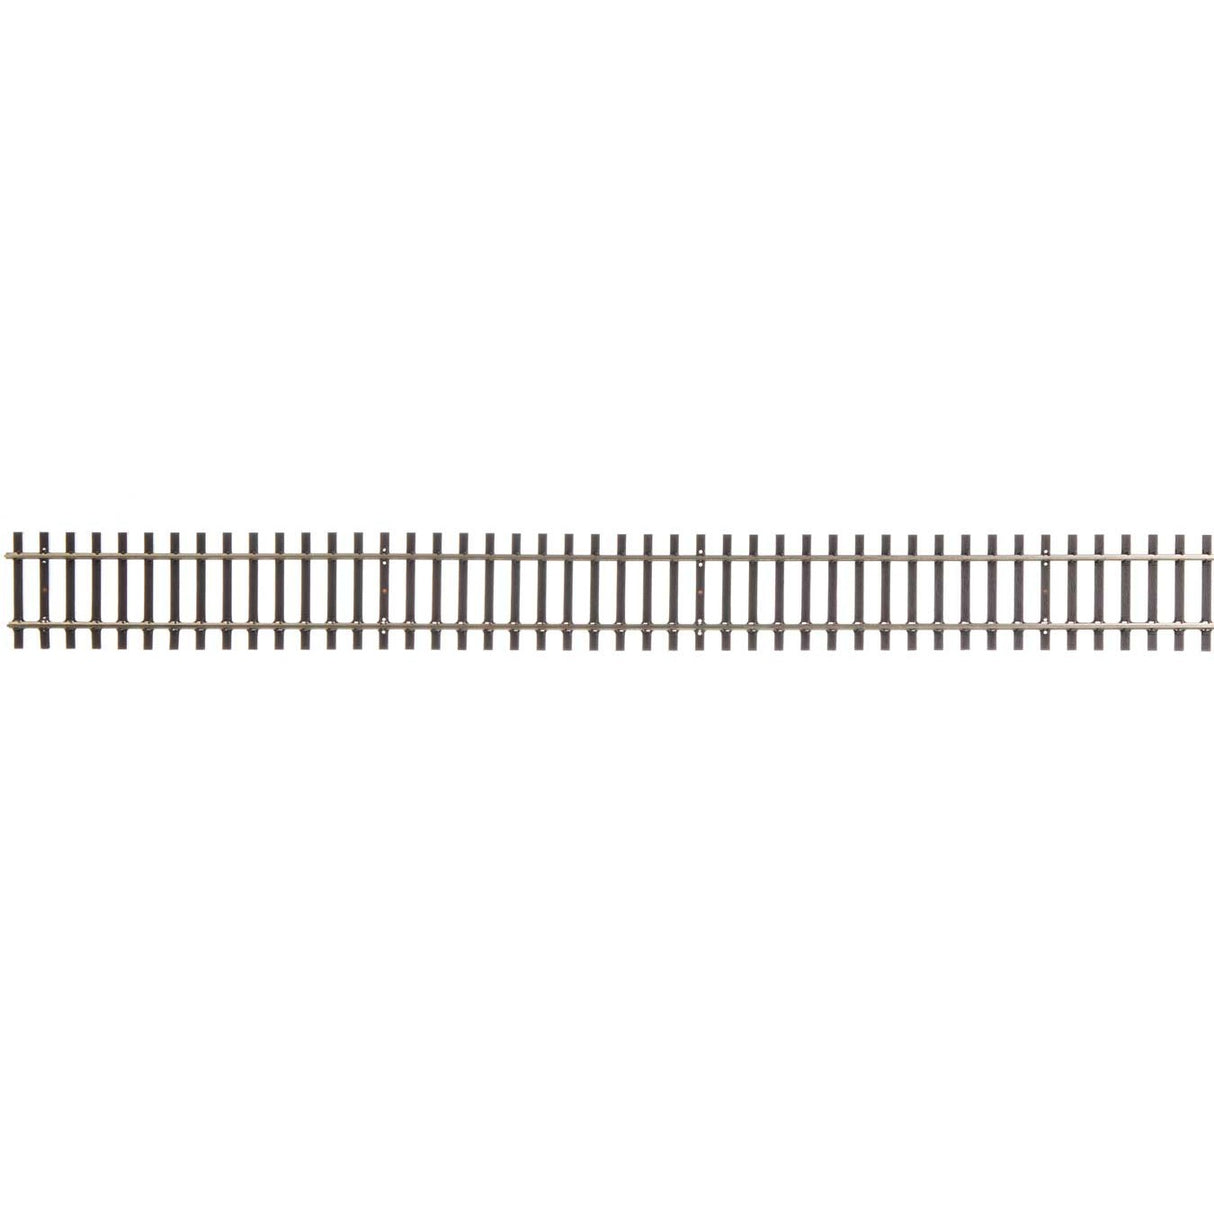 Walthers Code 70 Nickel Silver Flex Track with Wood Ties Each Section: 36" 91.4cm pkg(5)